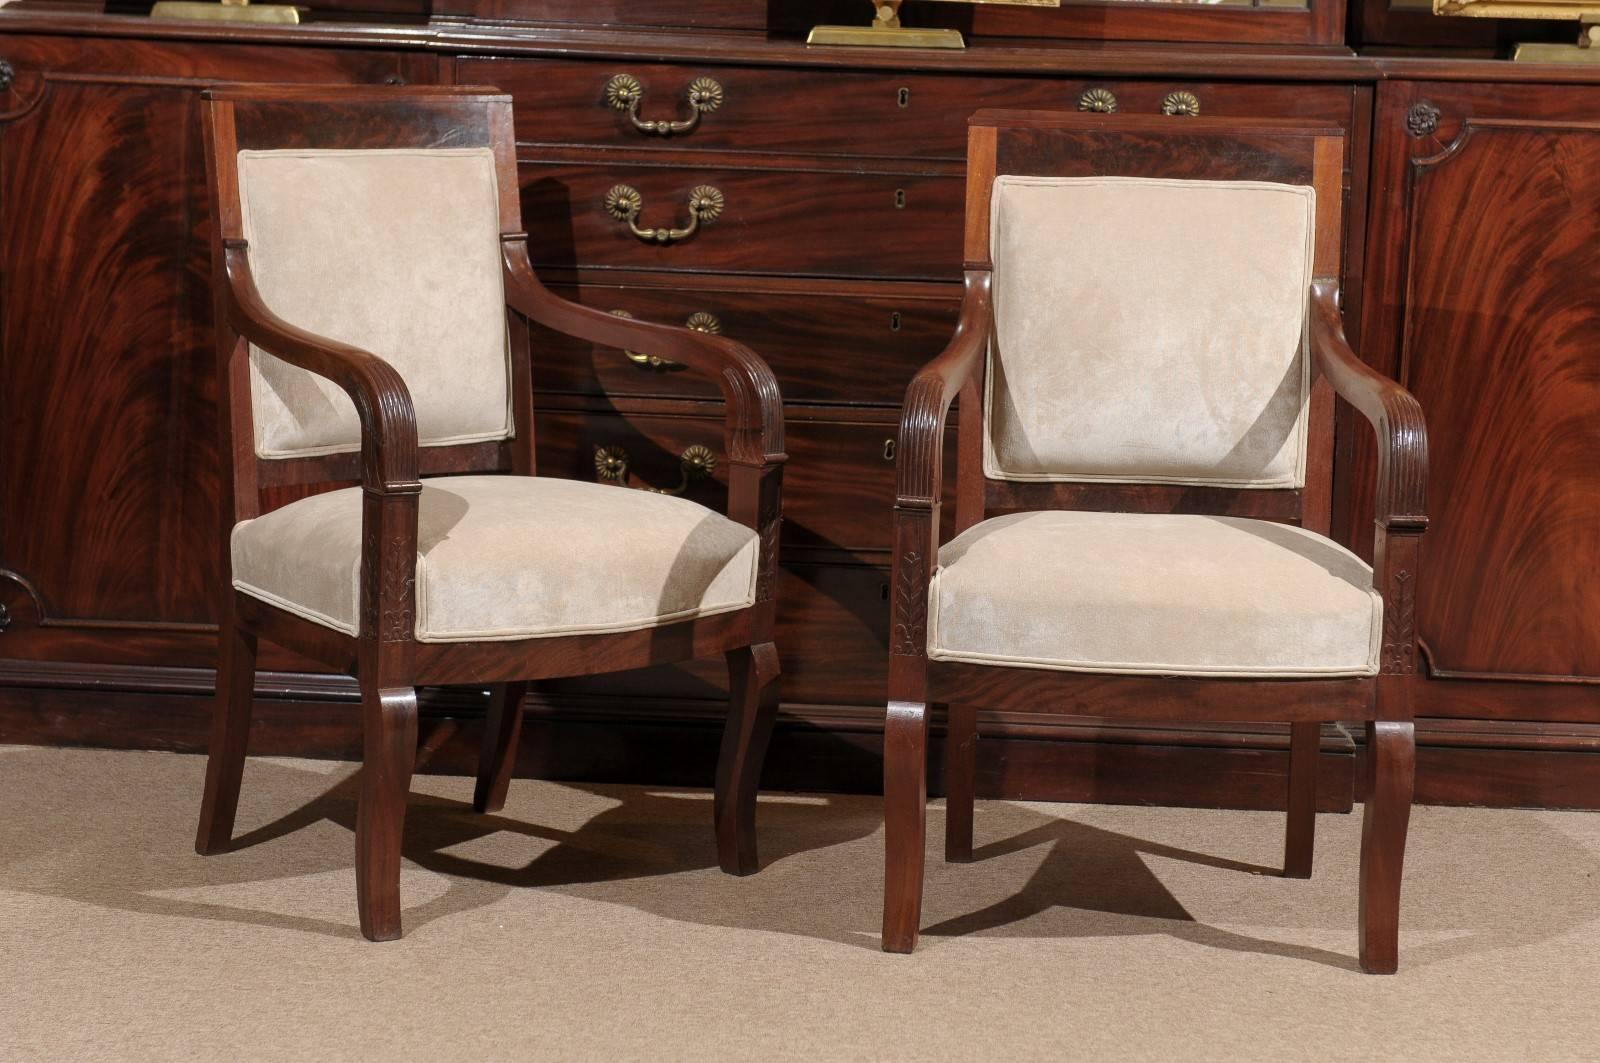 Pair of French Empire Mahogany fauteuils, 19th century, circa 1810. 3 pairs available.